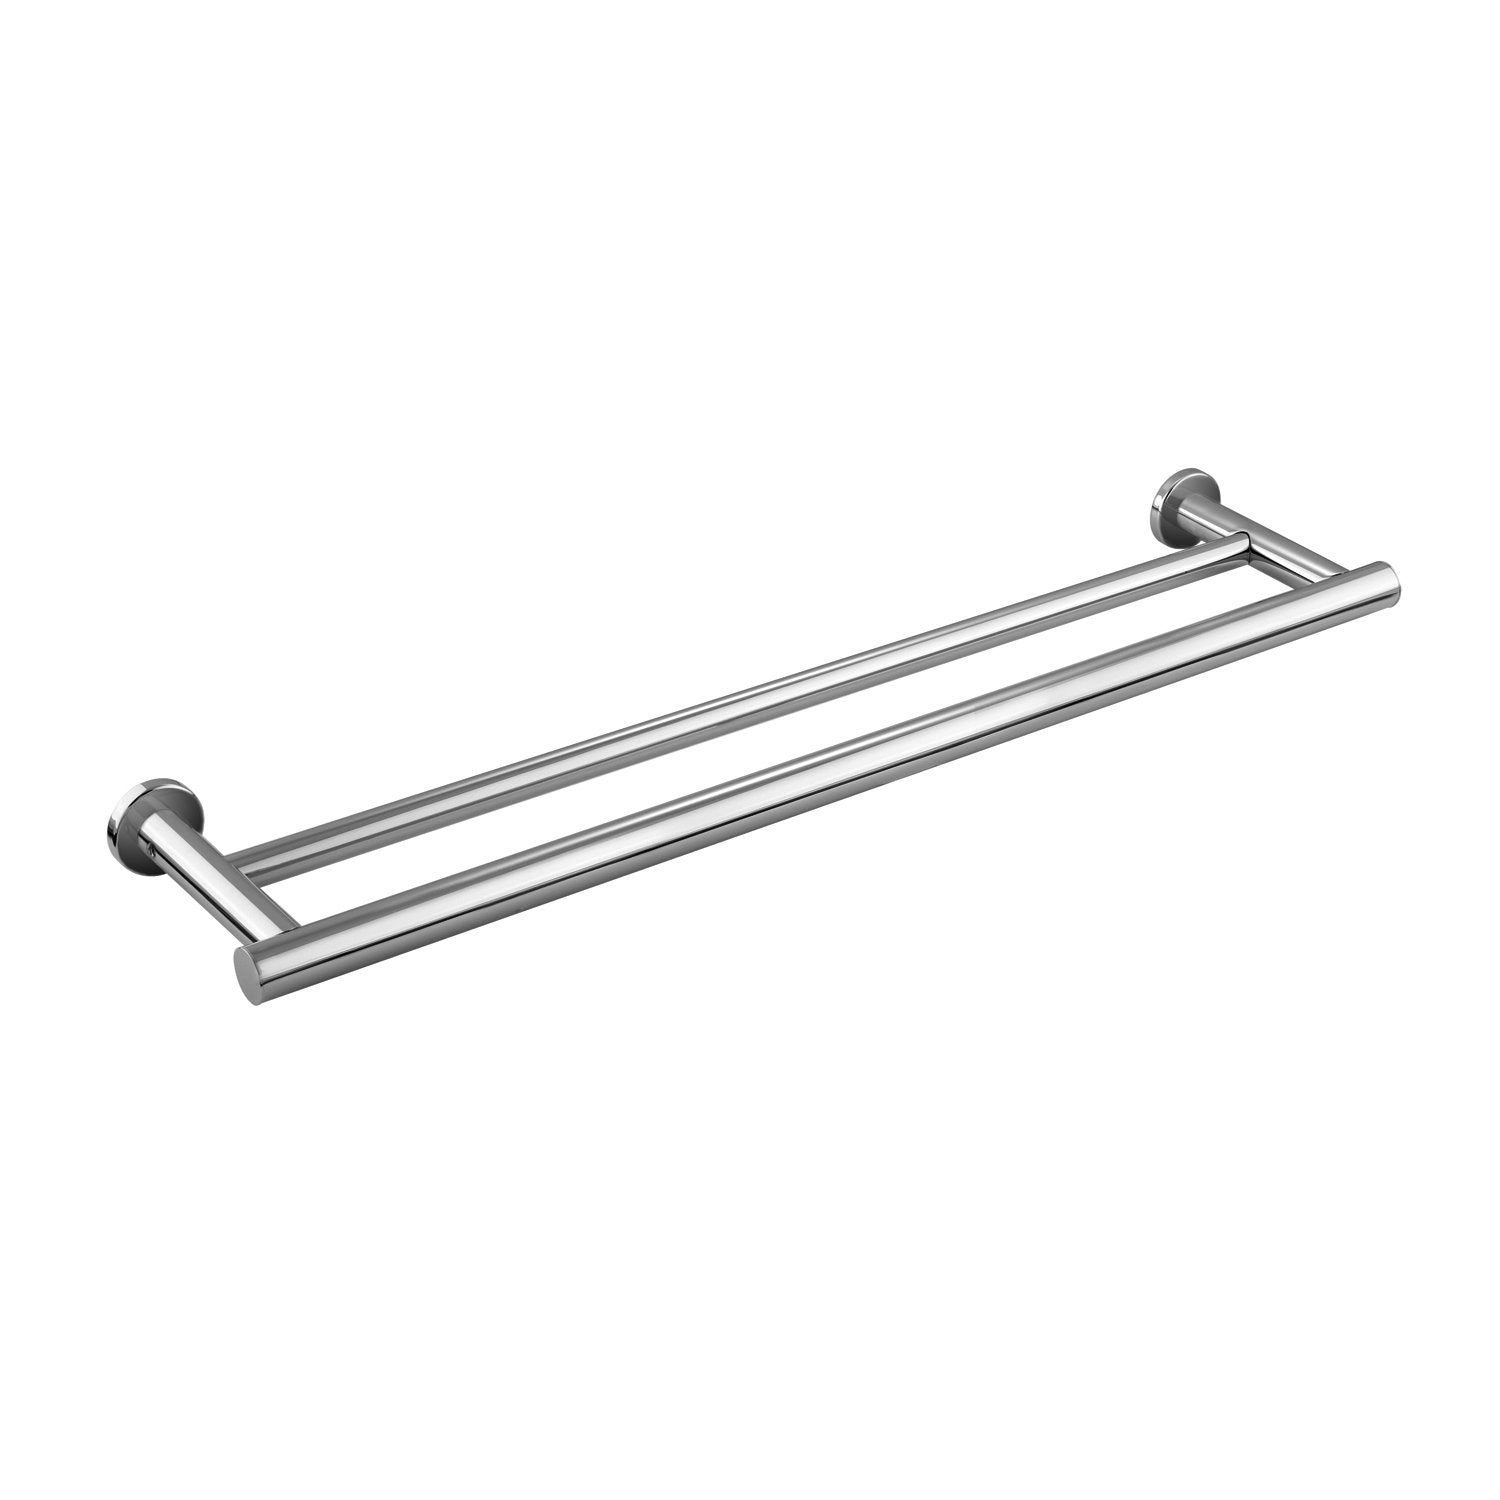 COSMIC Architect Double Towel Bar, Wall Mount, Brass Body, Chrome Finish, 23-1/6 x 1-9/16 x 5-1/8 Inches (2050161)